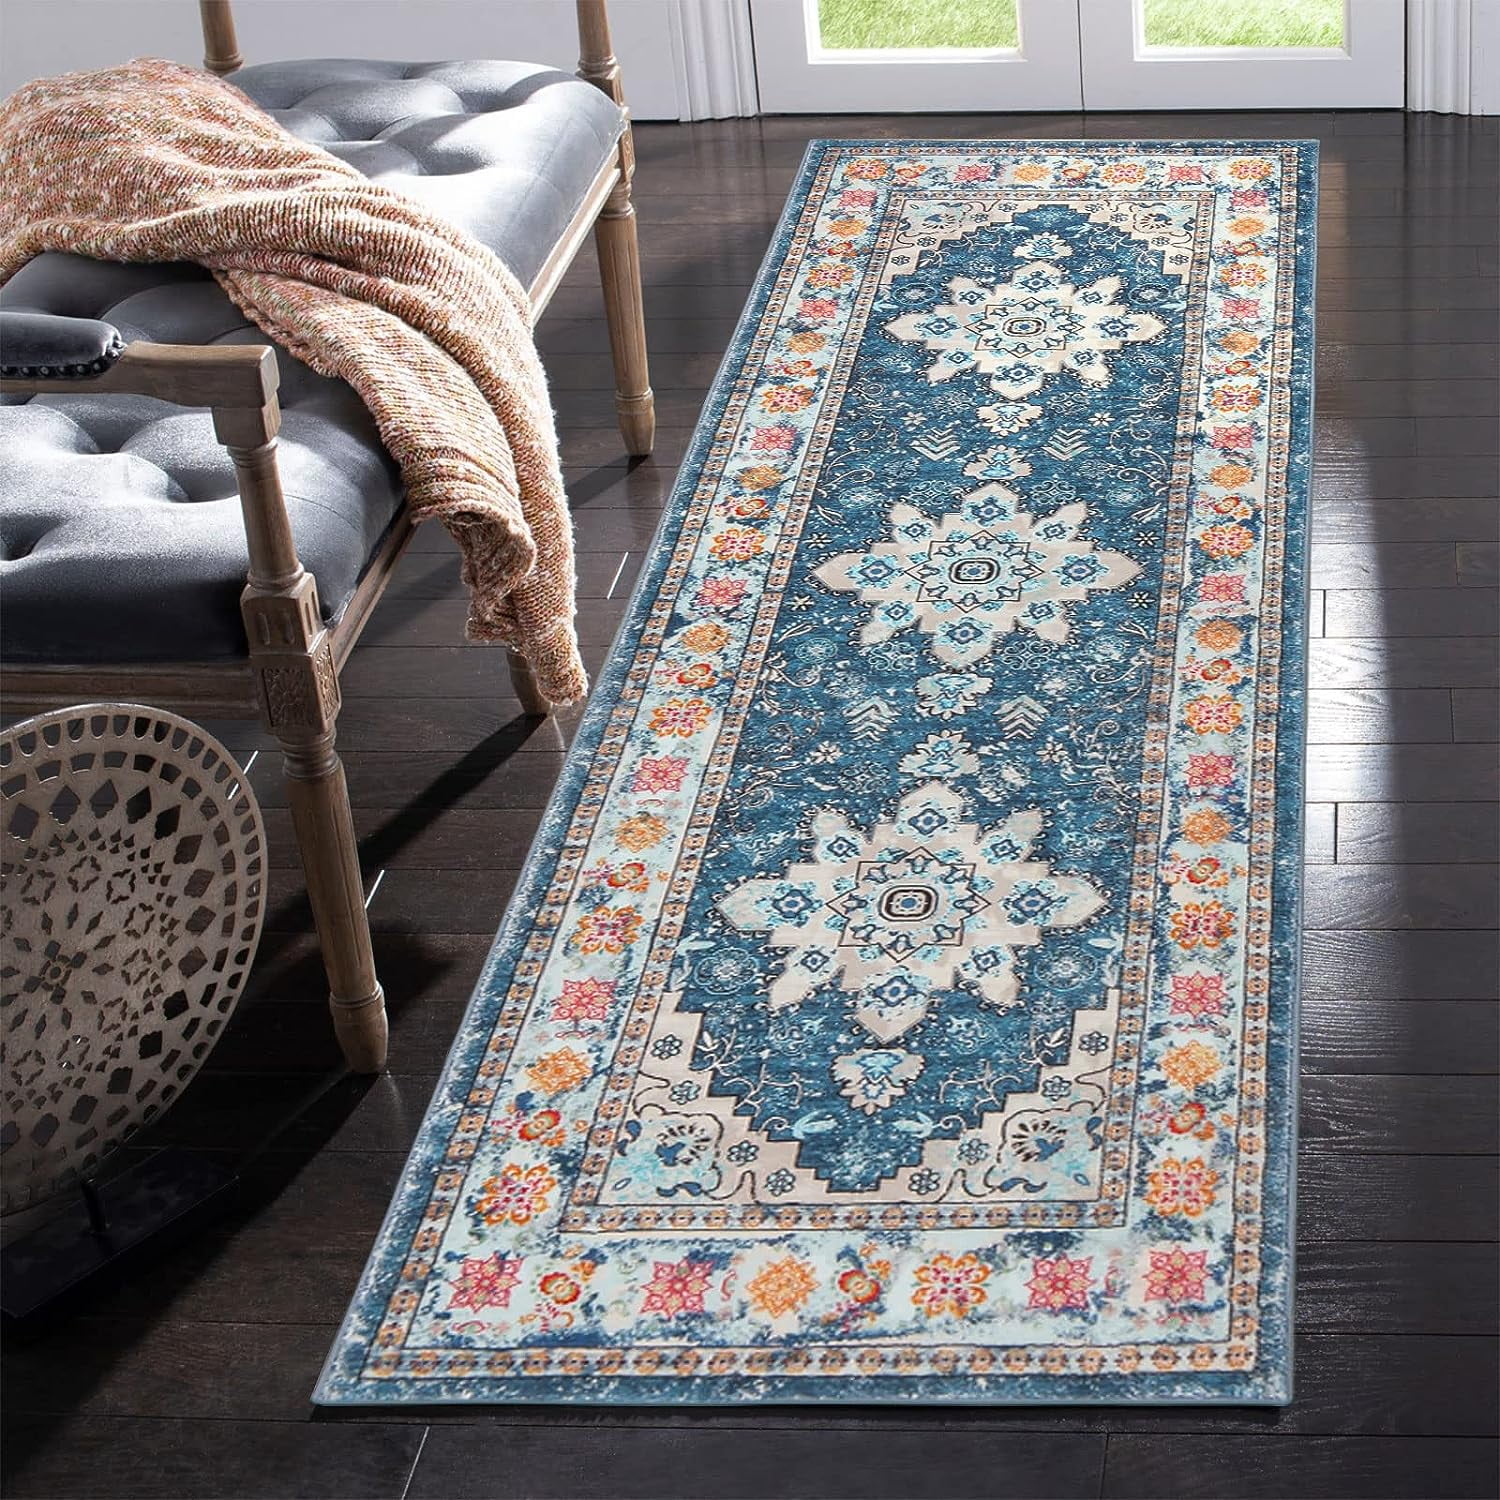 How To Use Area Rugs Over a Carpet – Boutique Rugs